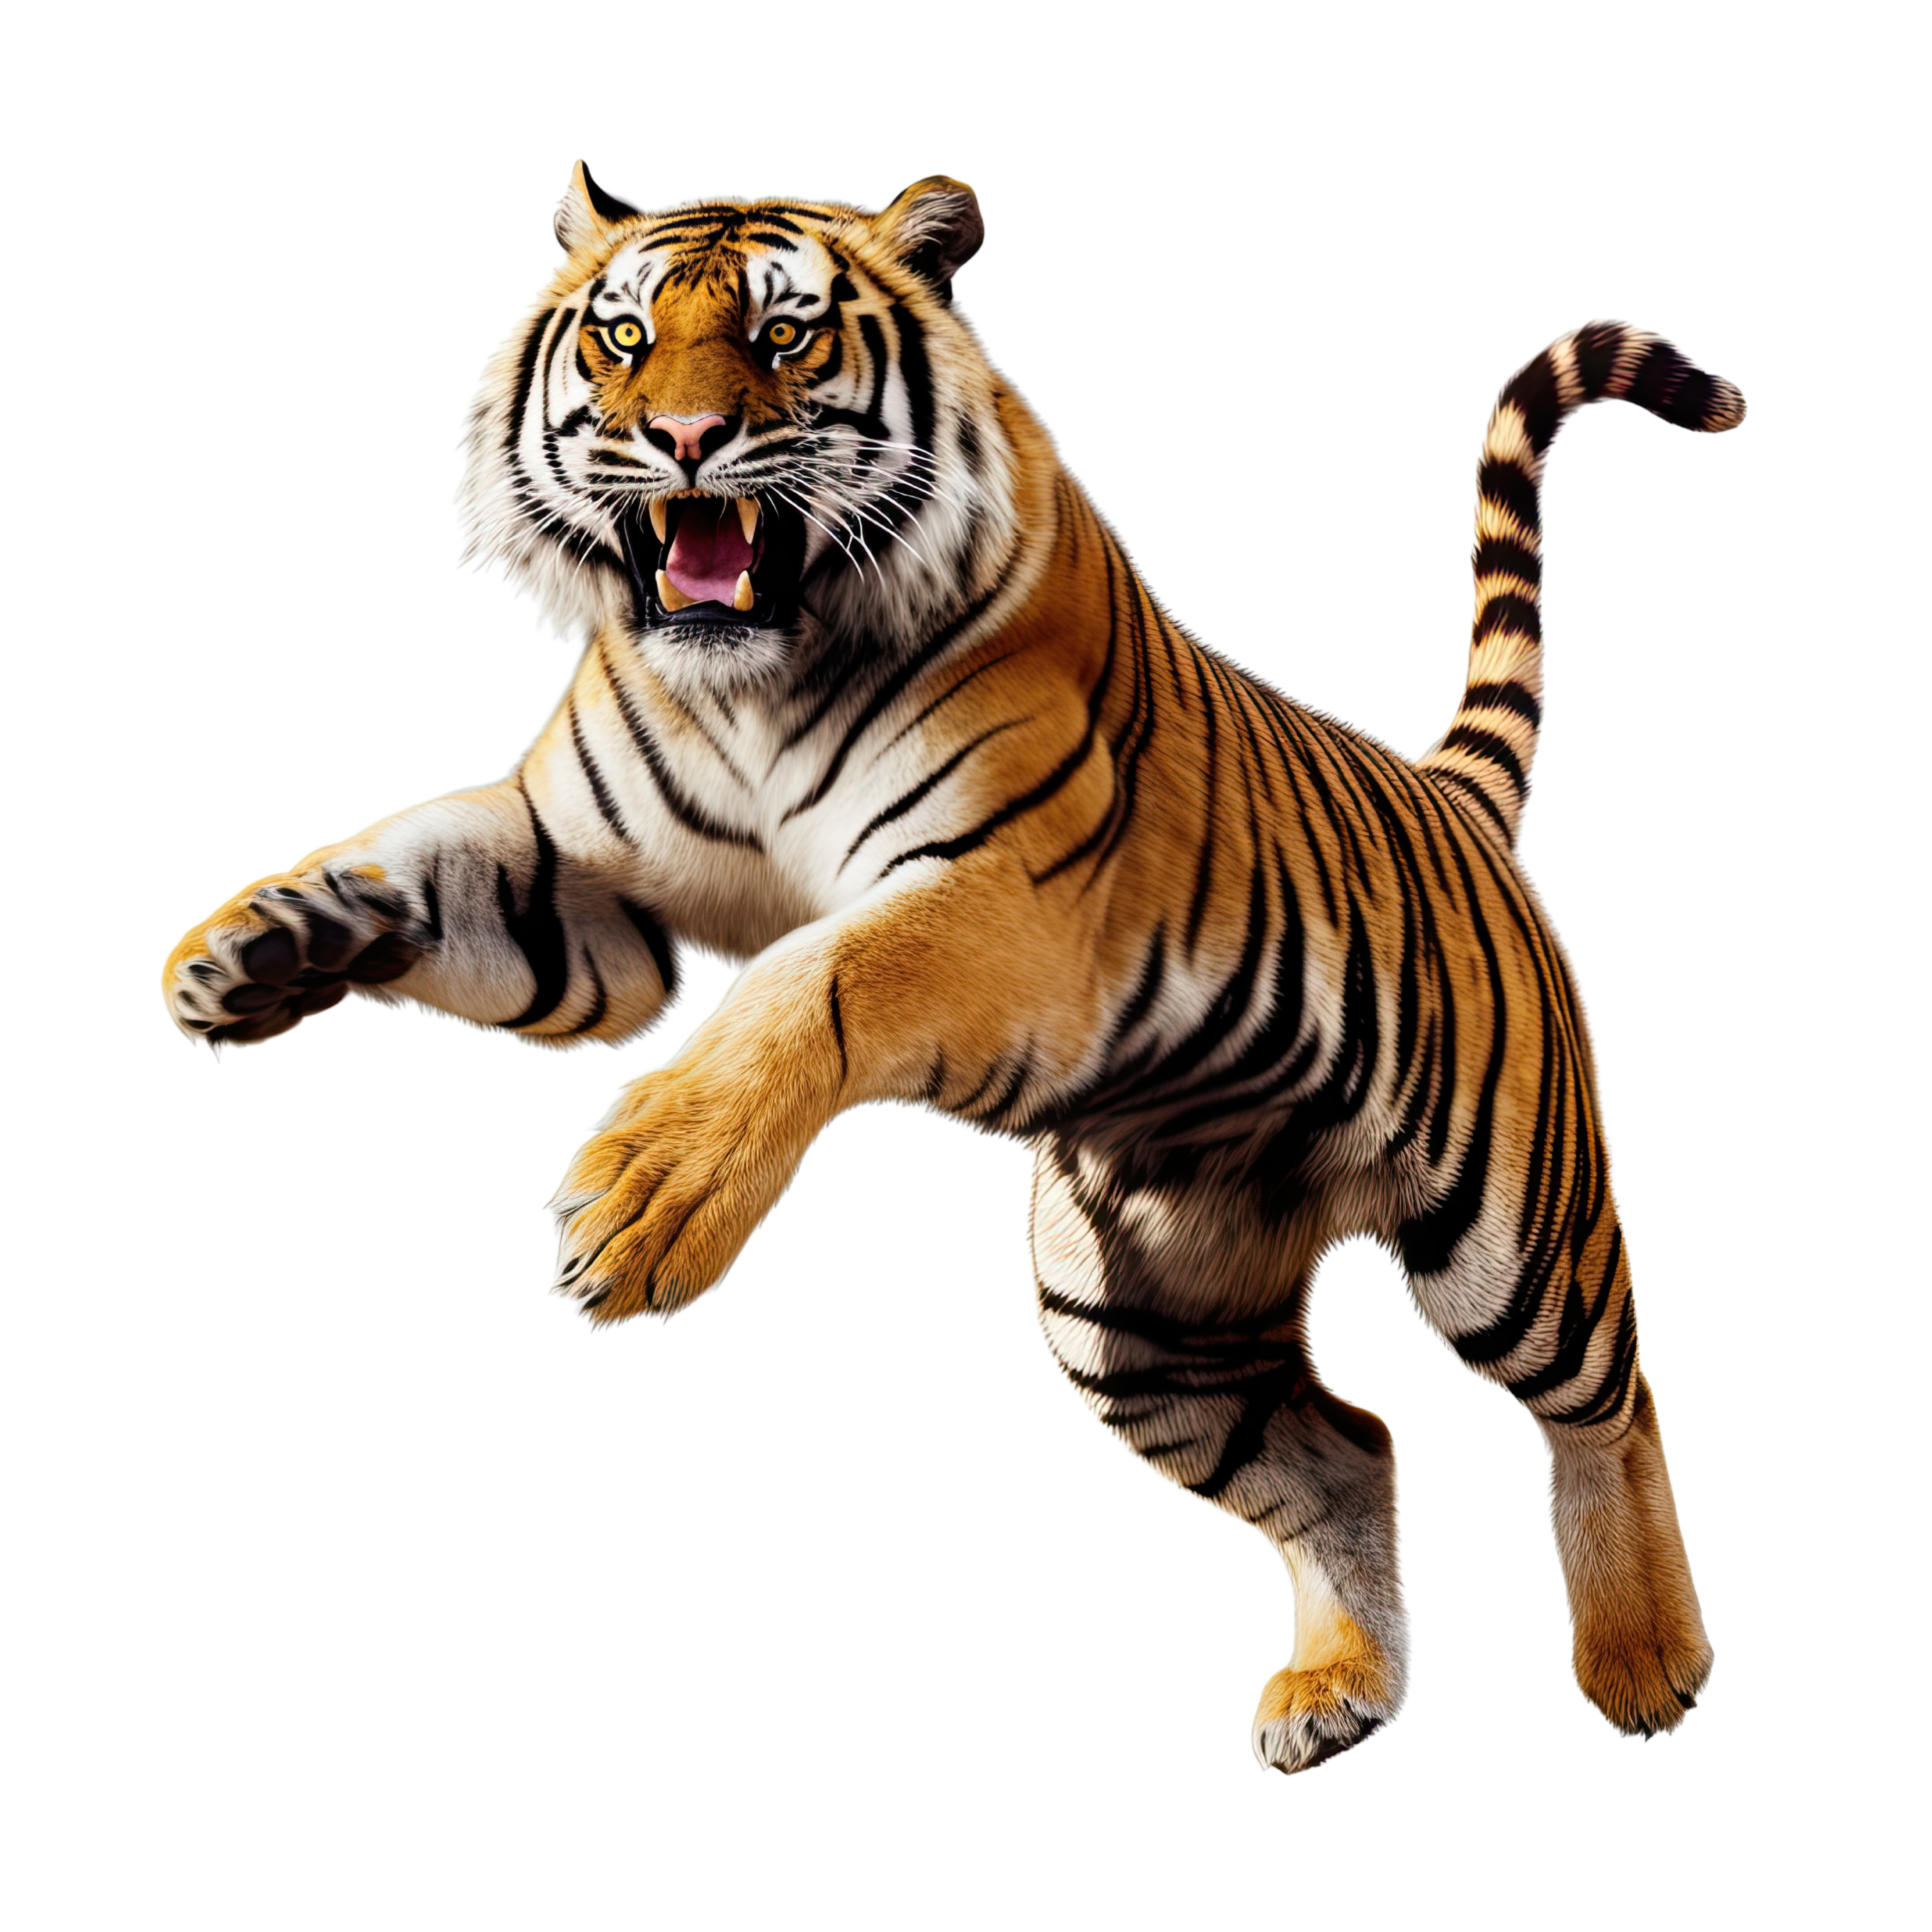 A tiger is jumping in the air with its mouth open.